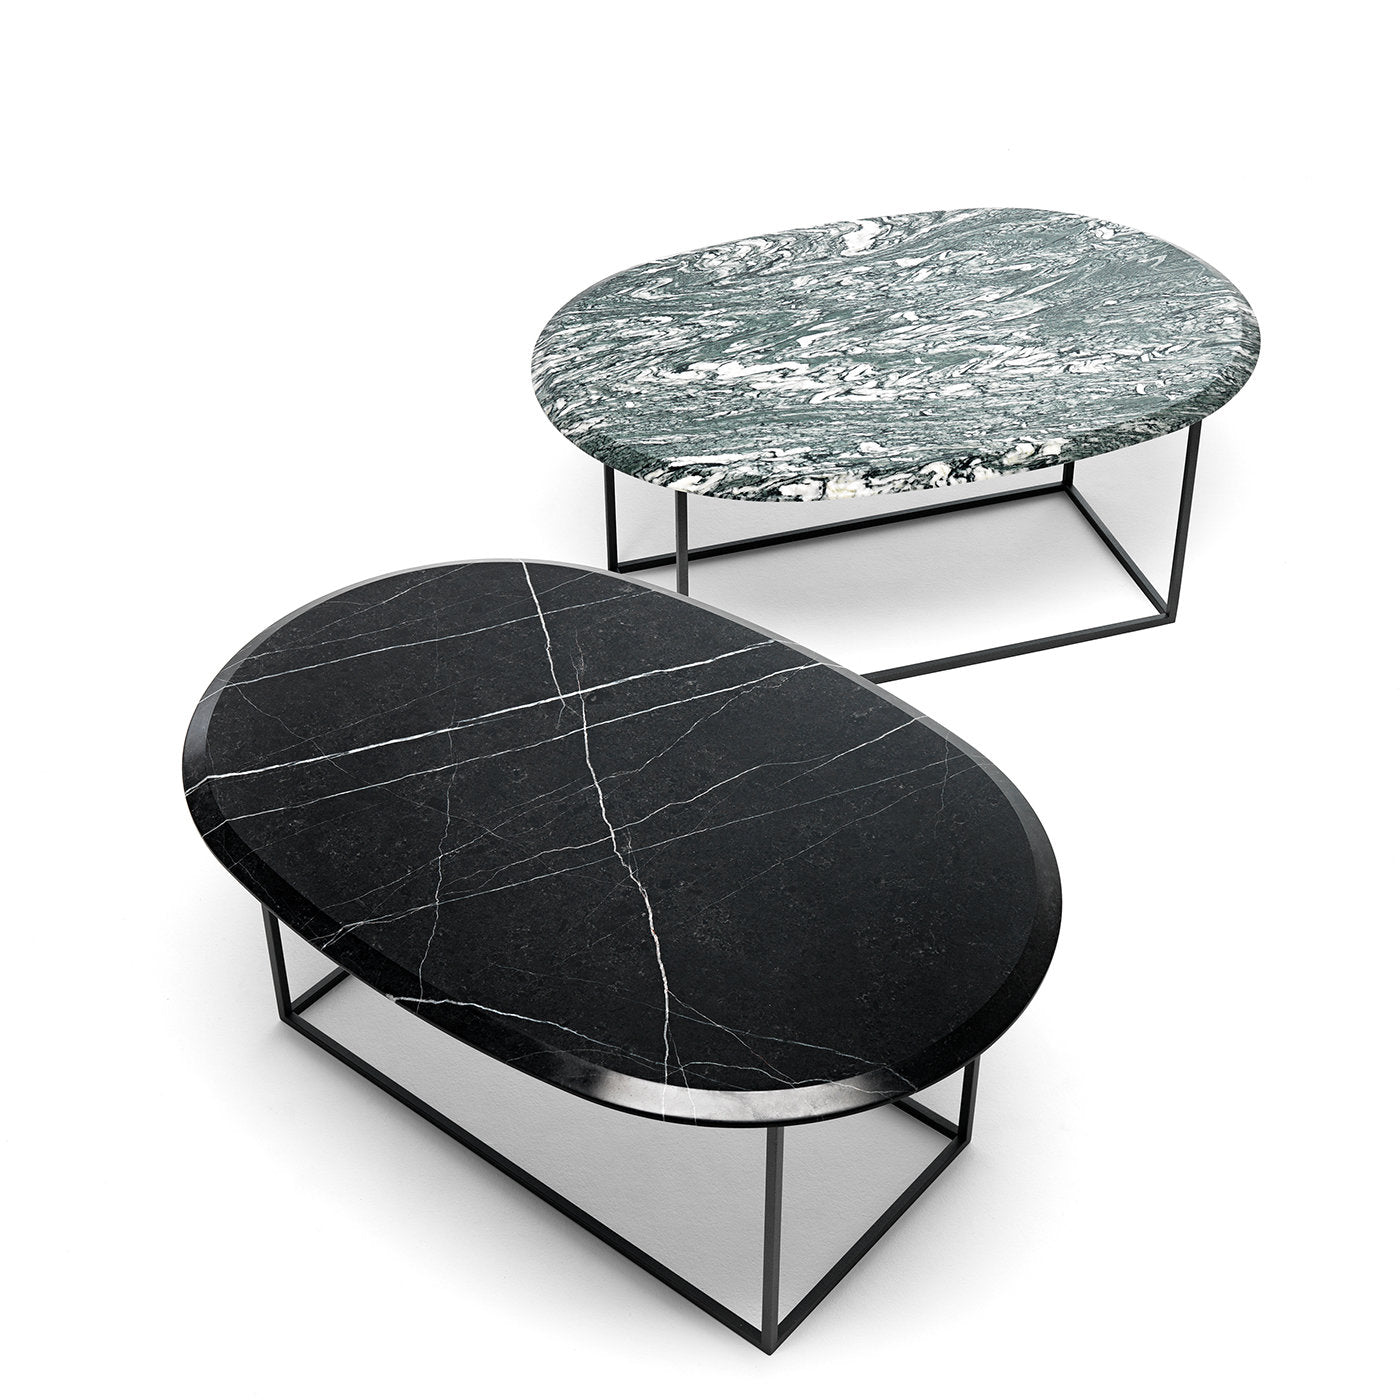 MT Low Coffee Table with Cipollino Marble Top - Alternative view 3